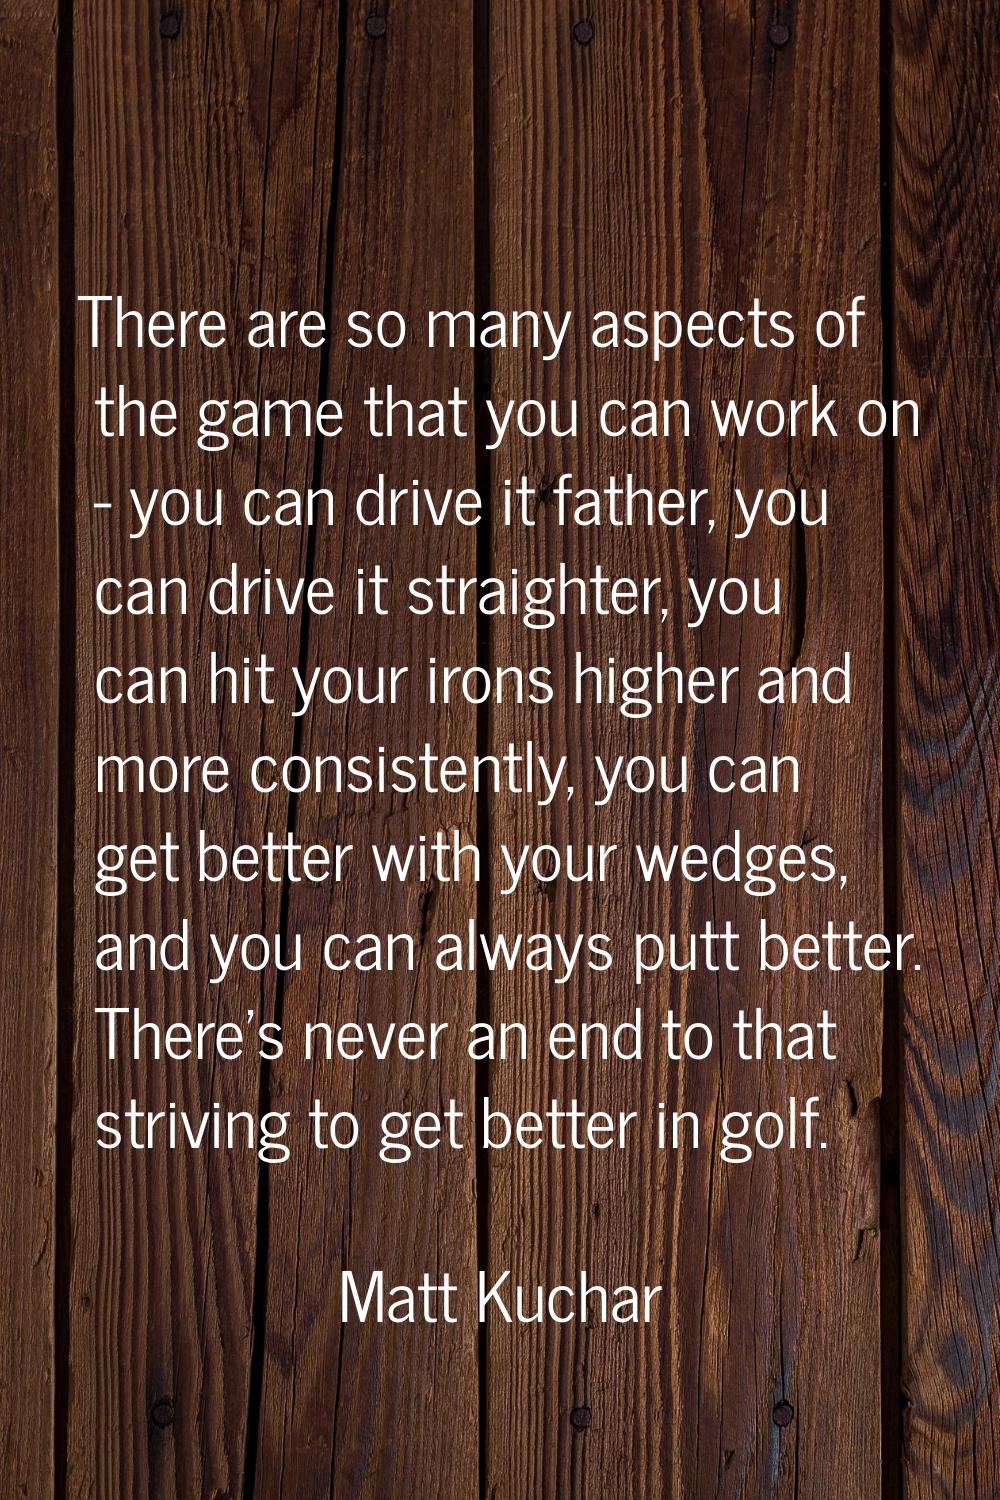 There are so many aspects of the game that you can work on - you can drive it father, you can drive